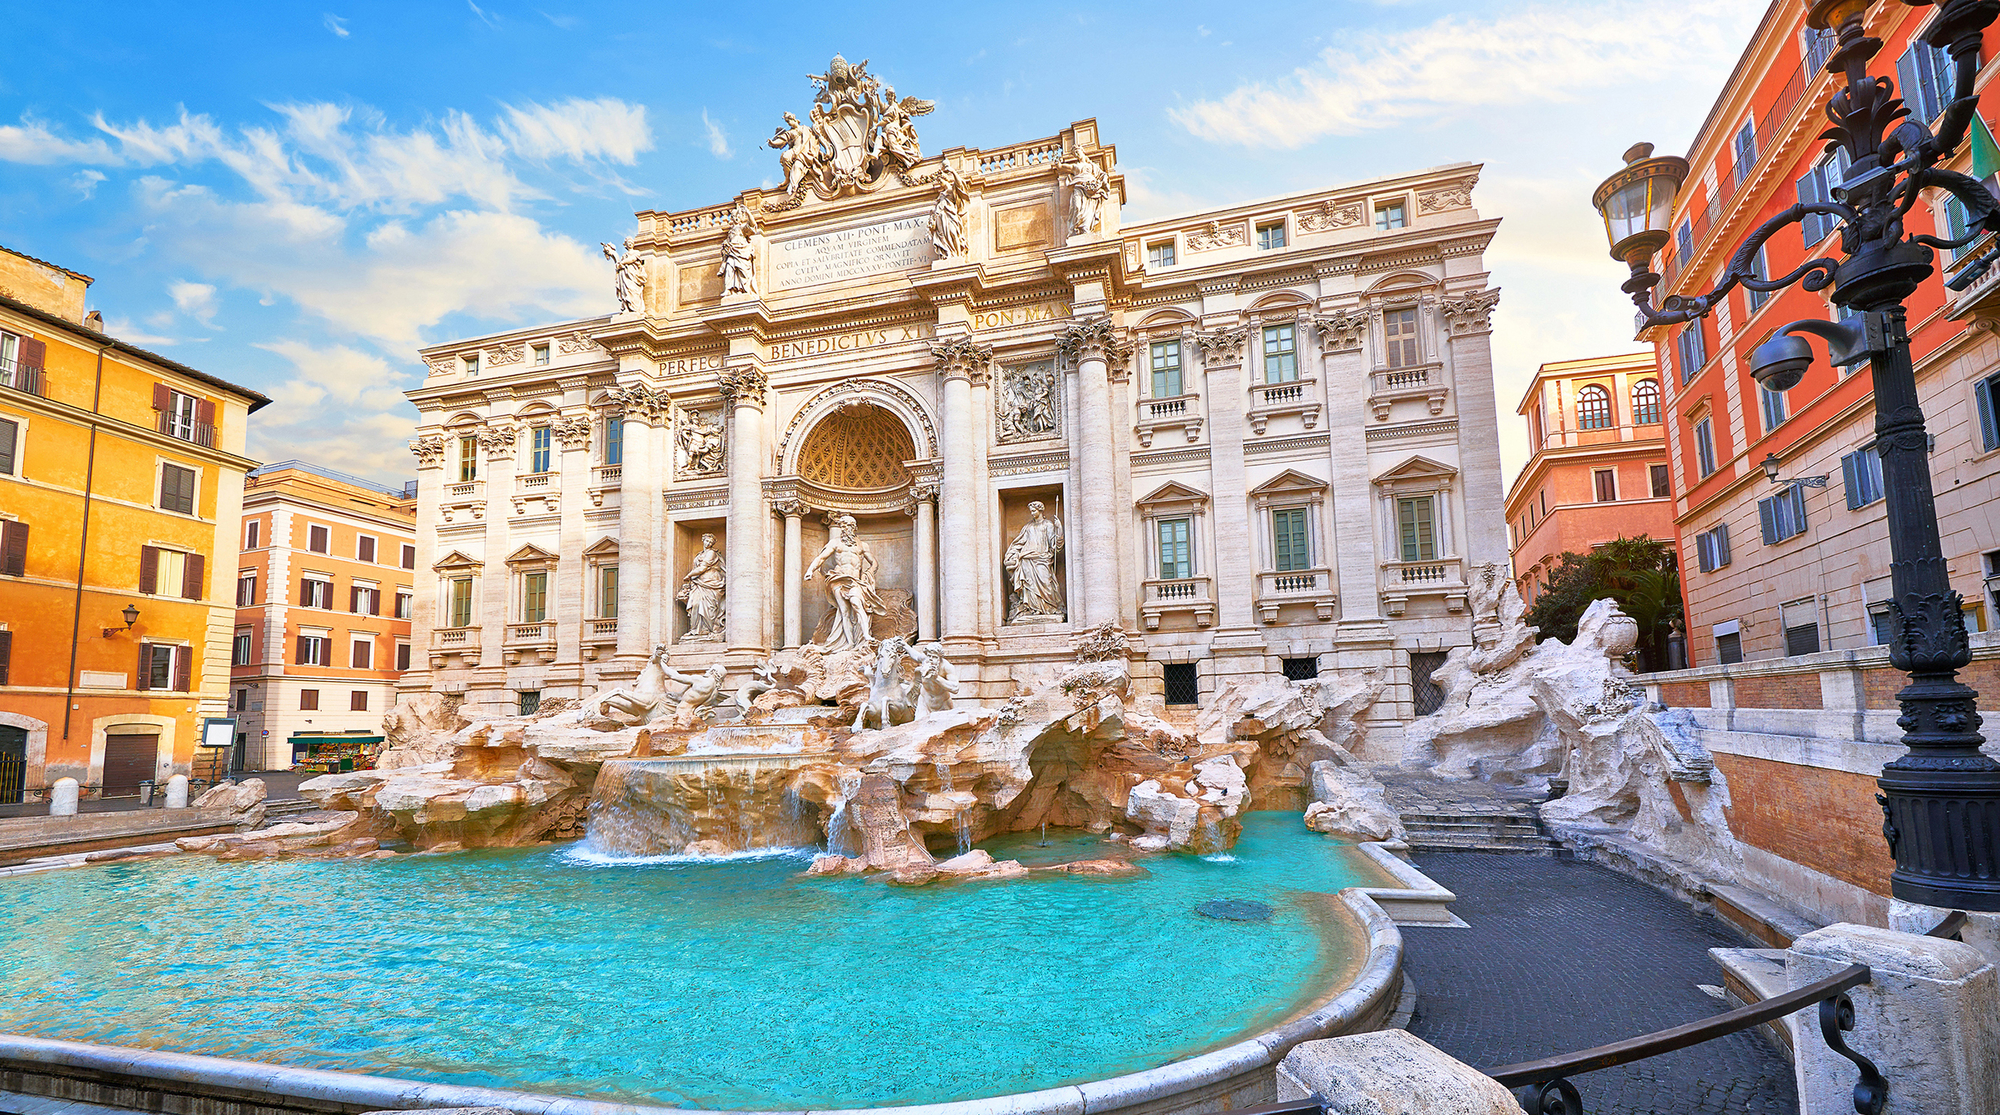 Trevi Fountain in Rome, Italy. Ancient fountain. Roman statues at piazza in old medieval city among traditional italian houses and street lamps. Famous landmark. Touristic destination for vacation.